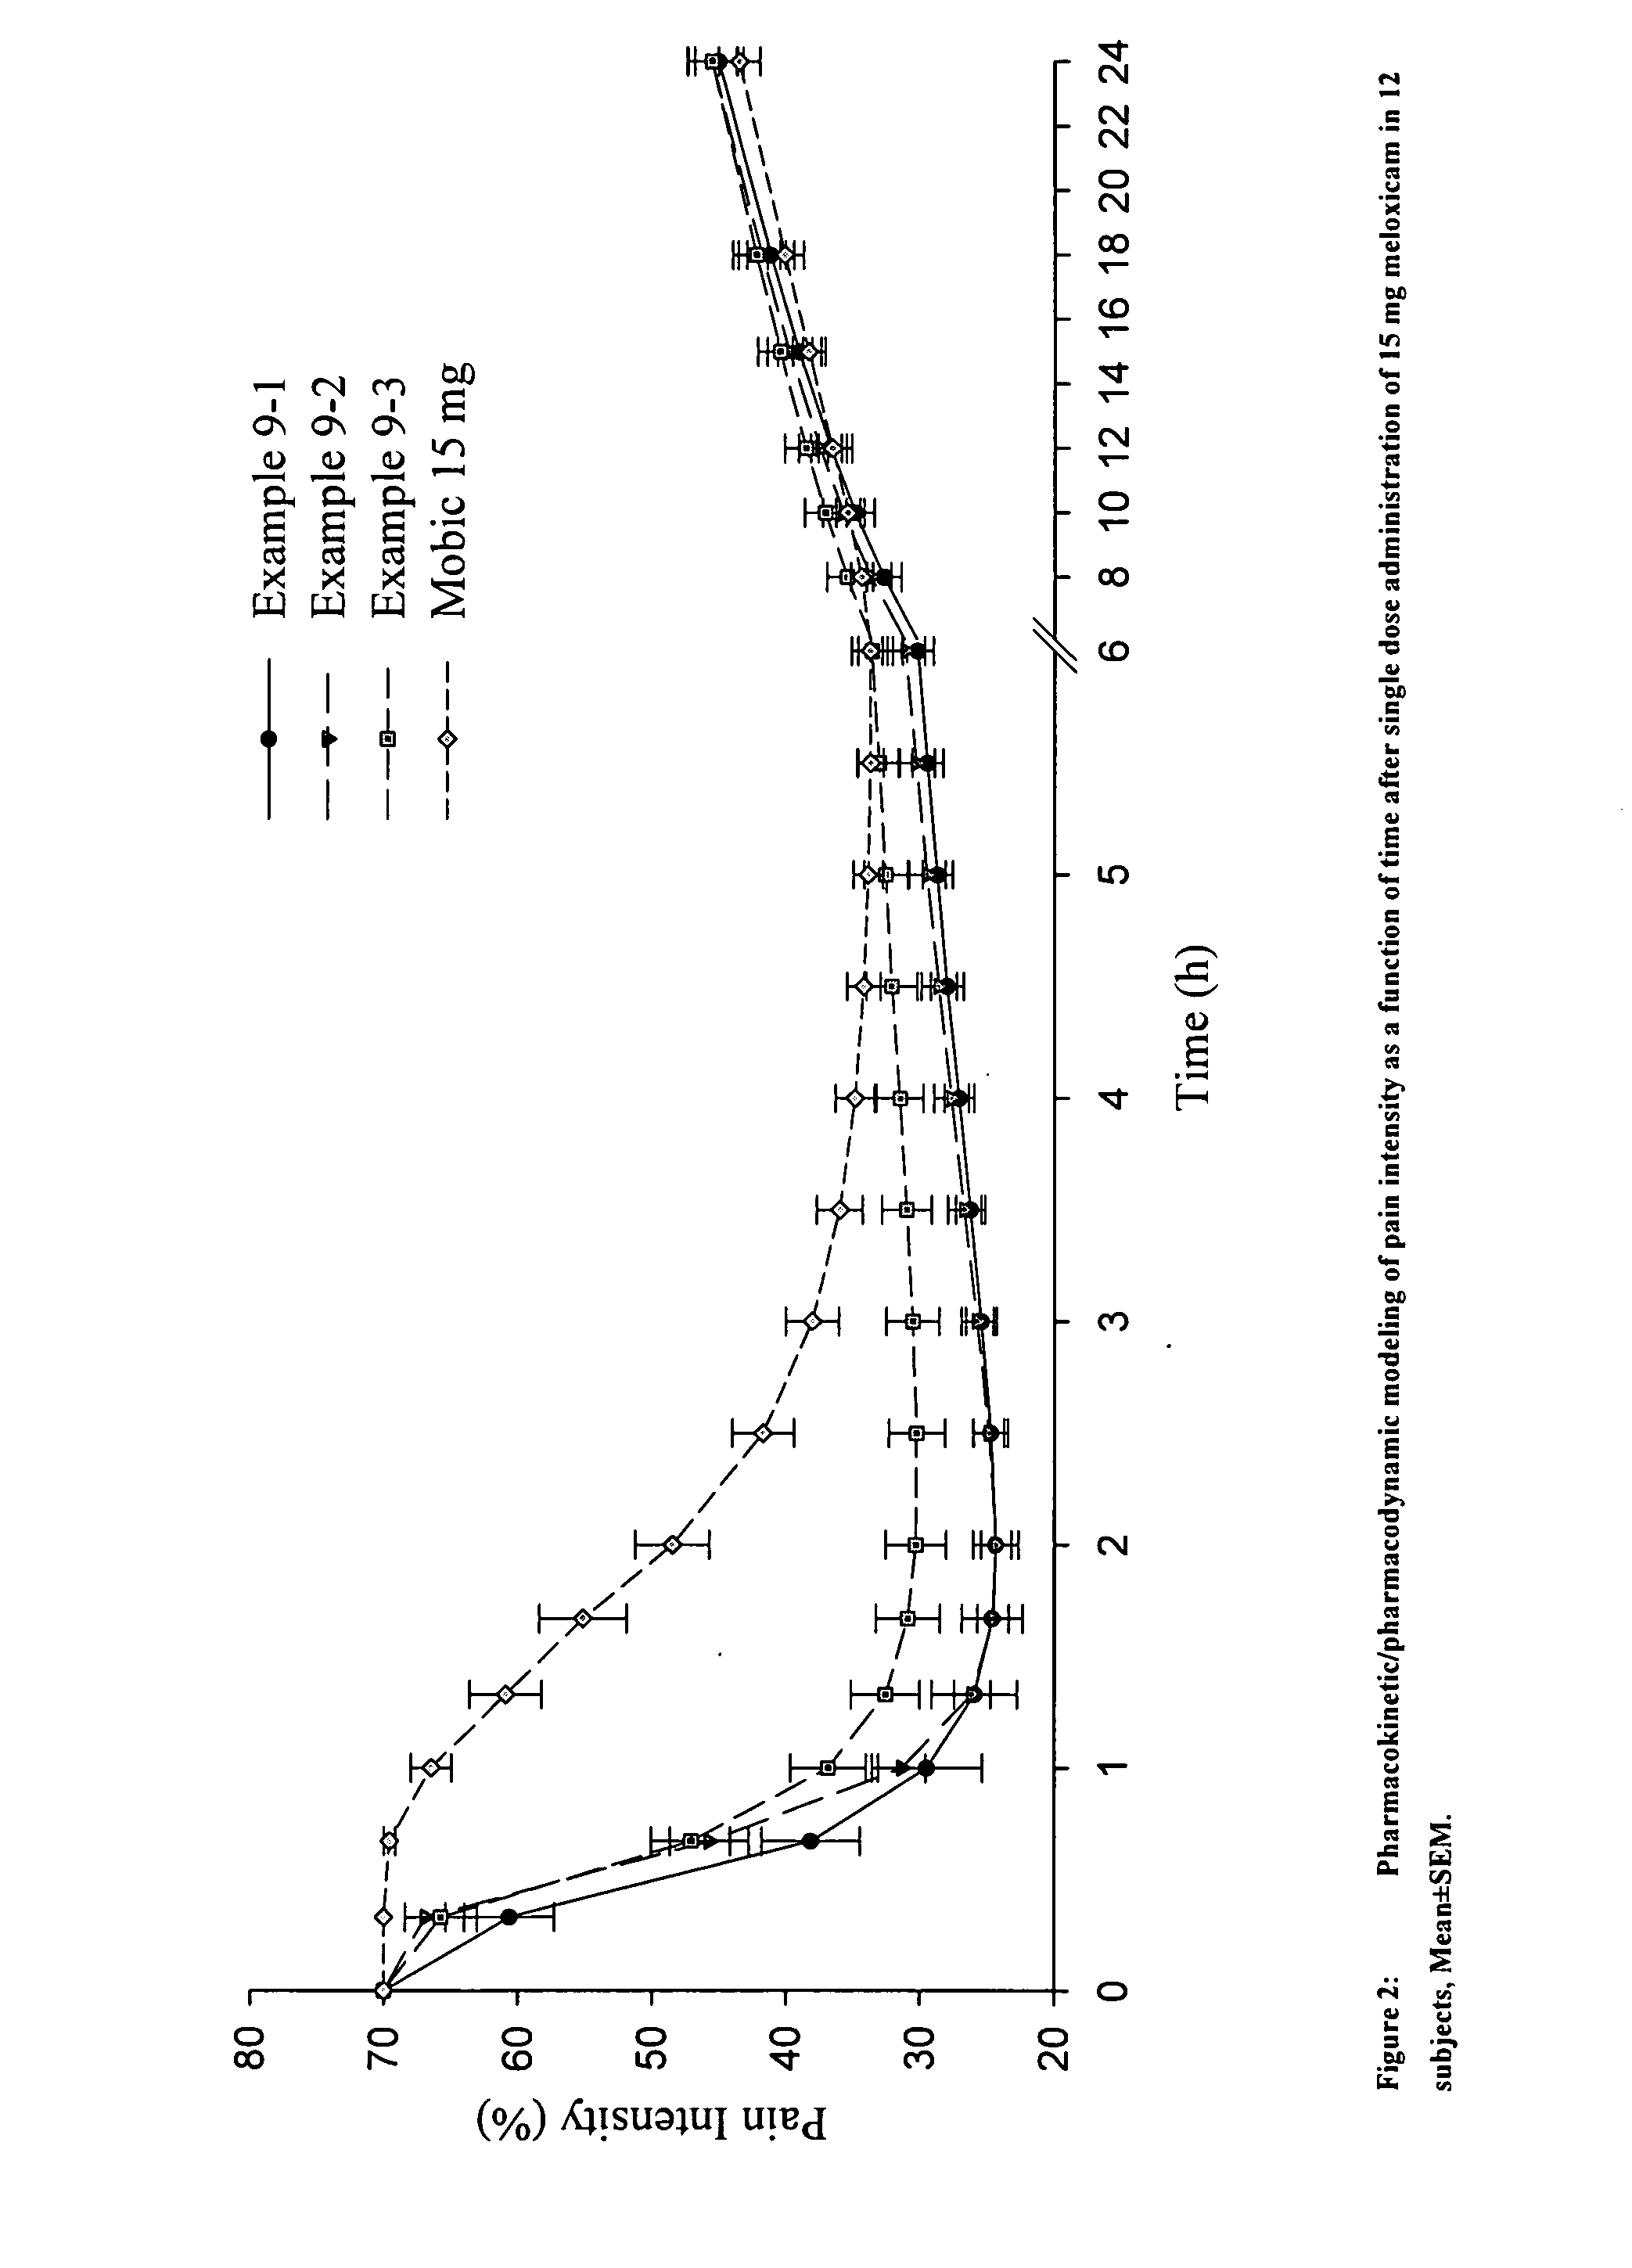 Anti-inflammatory and analgesic compositions and related methods